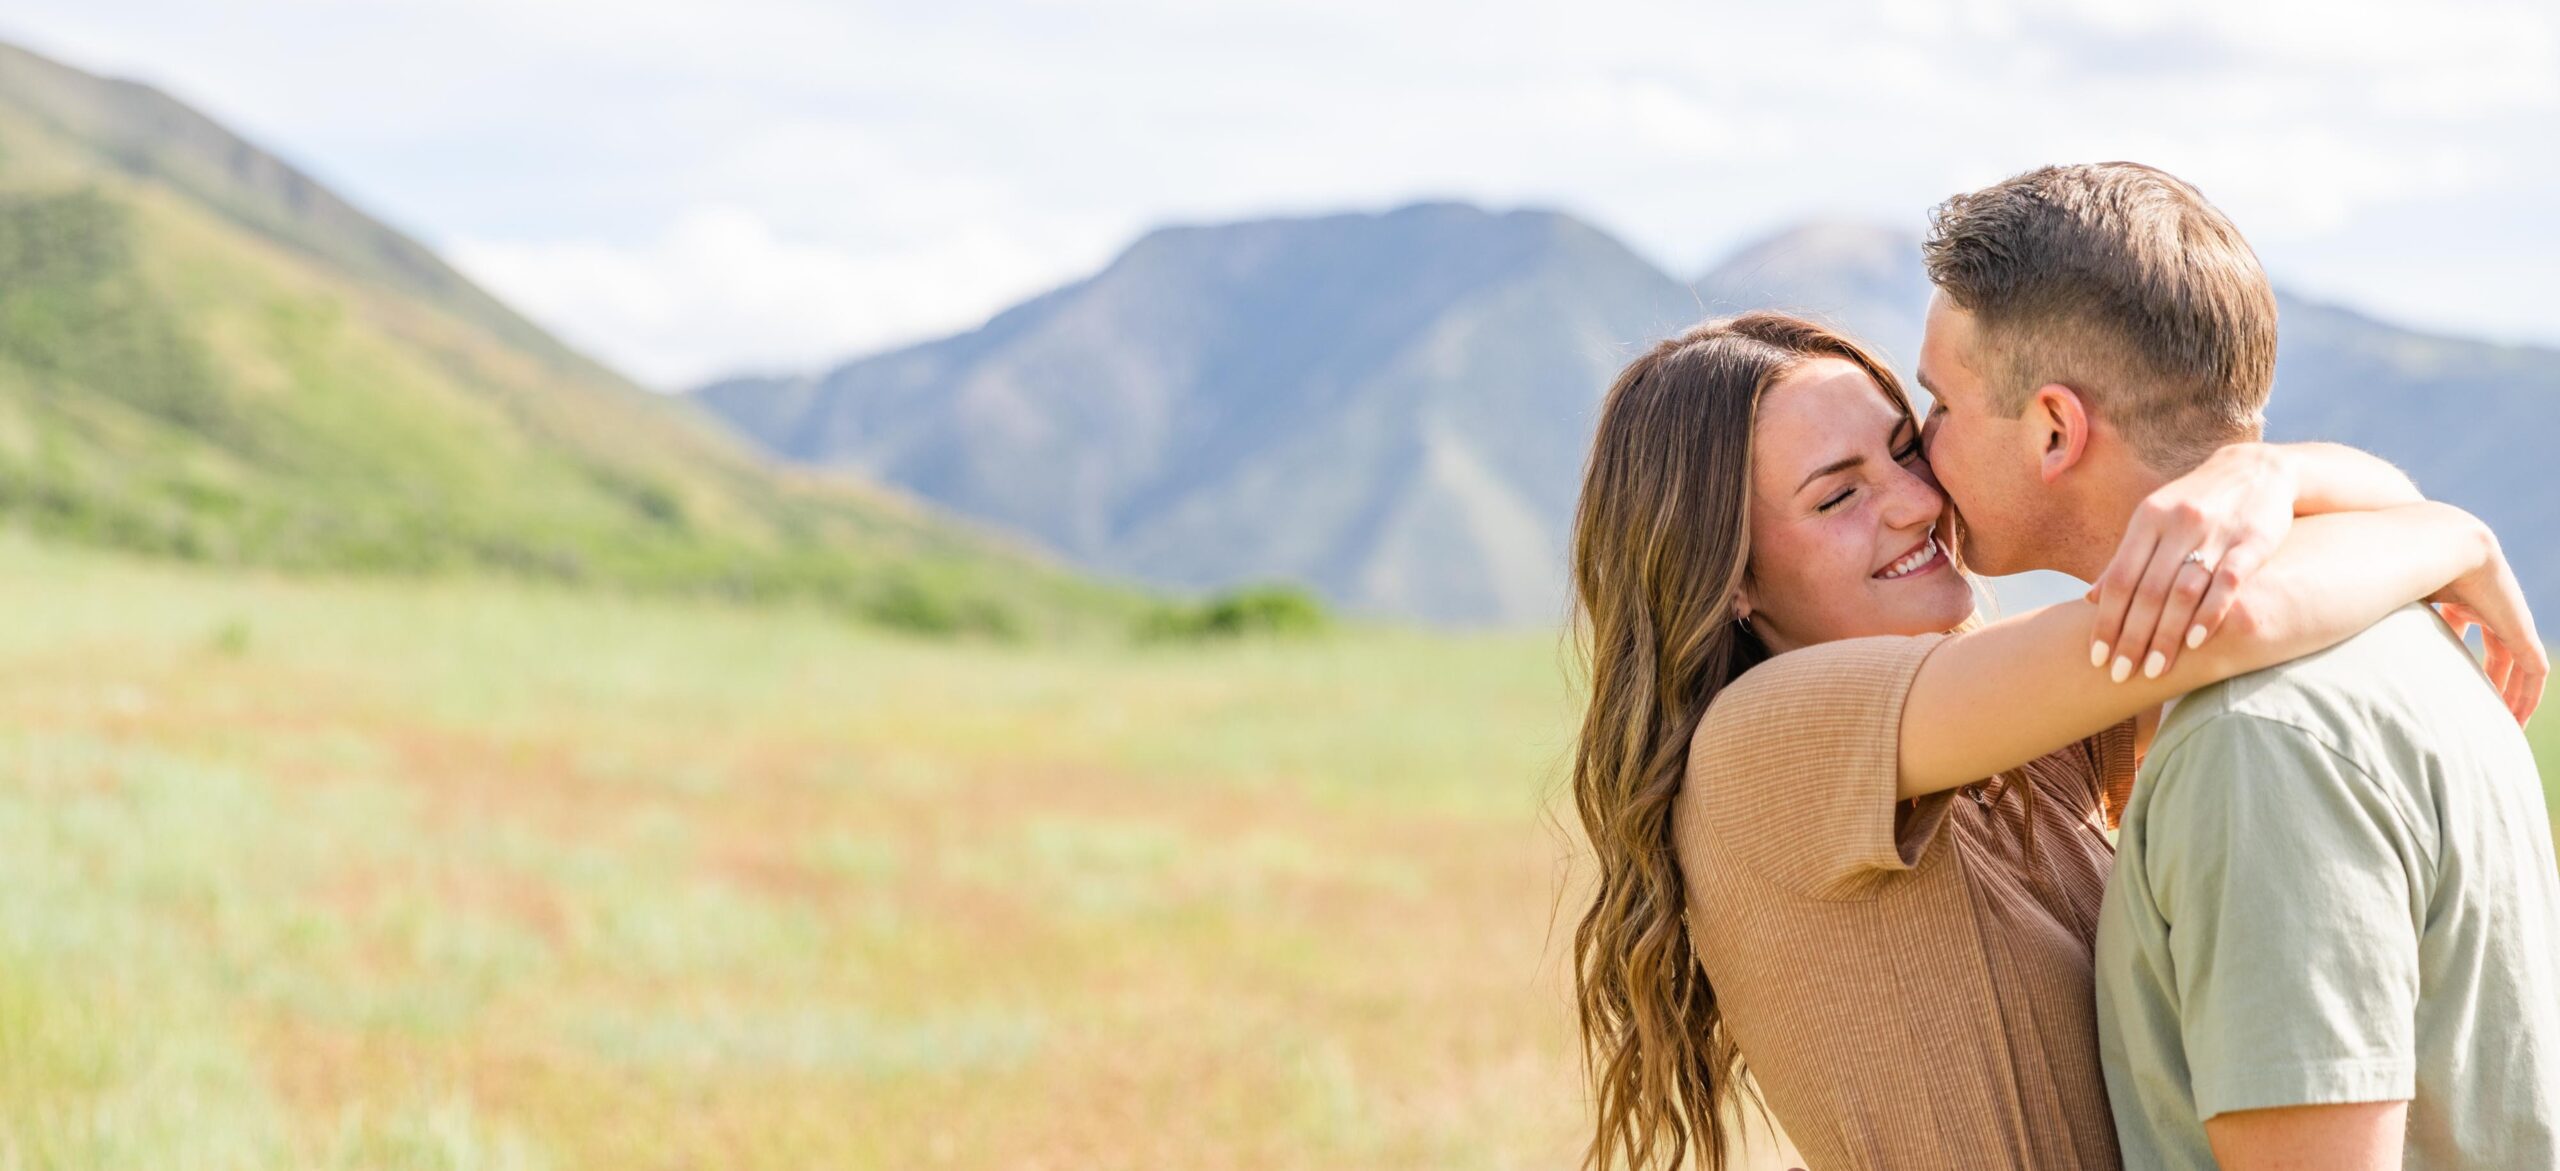 engagement photos in a utah field